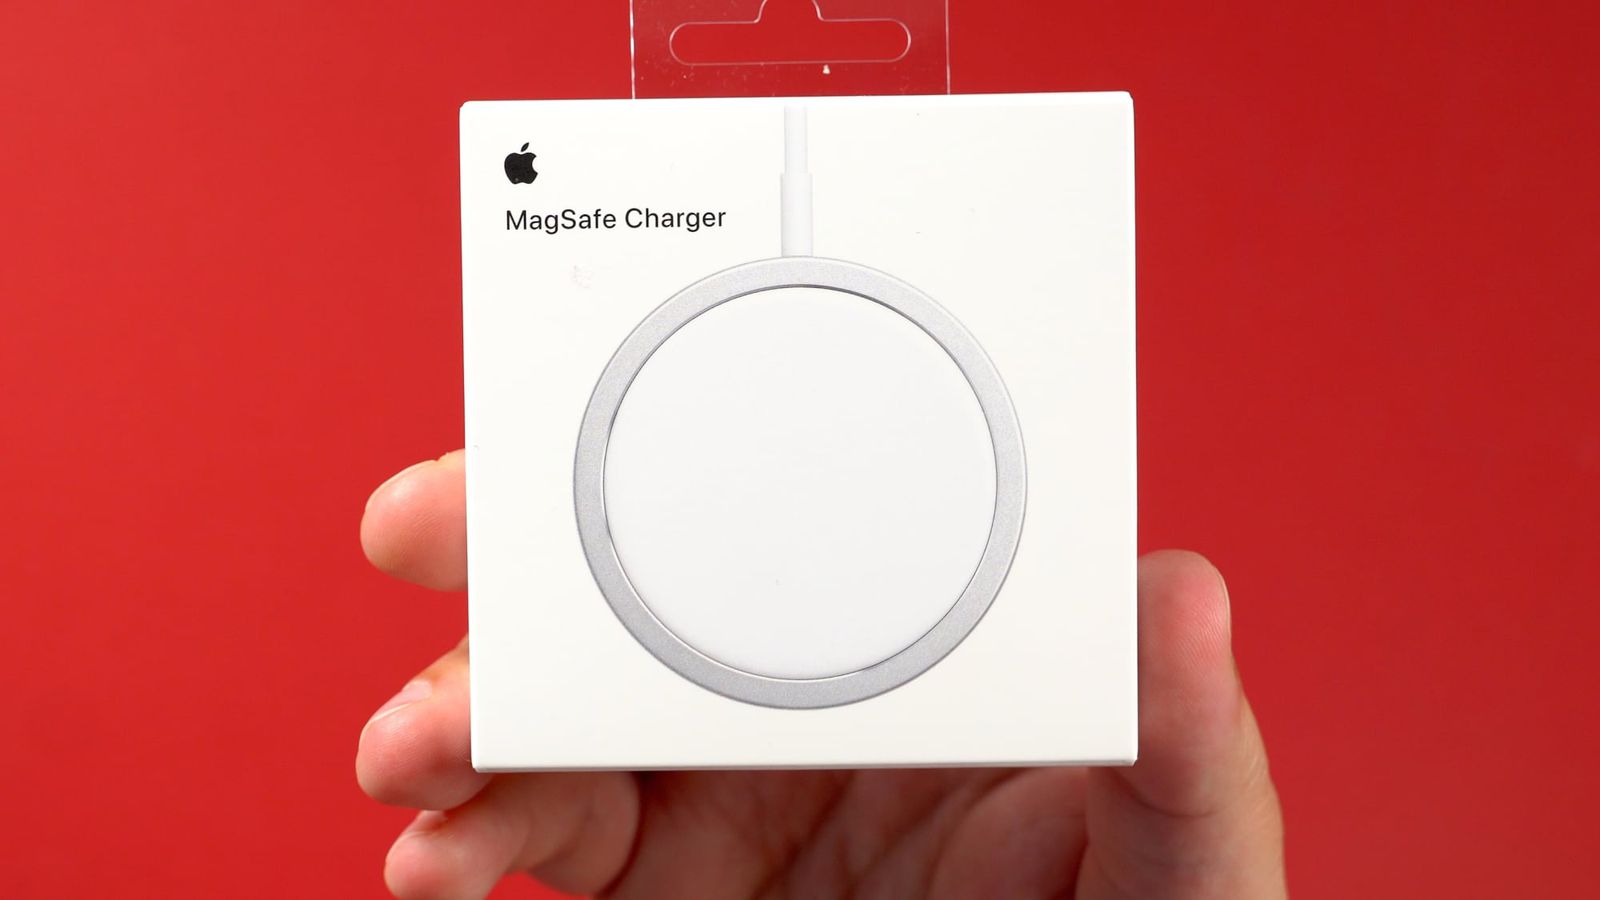 Deals: Apple's MagSafe Charger Hits New Low Price at $29.85 ($9